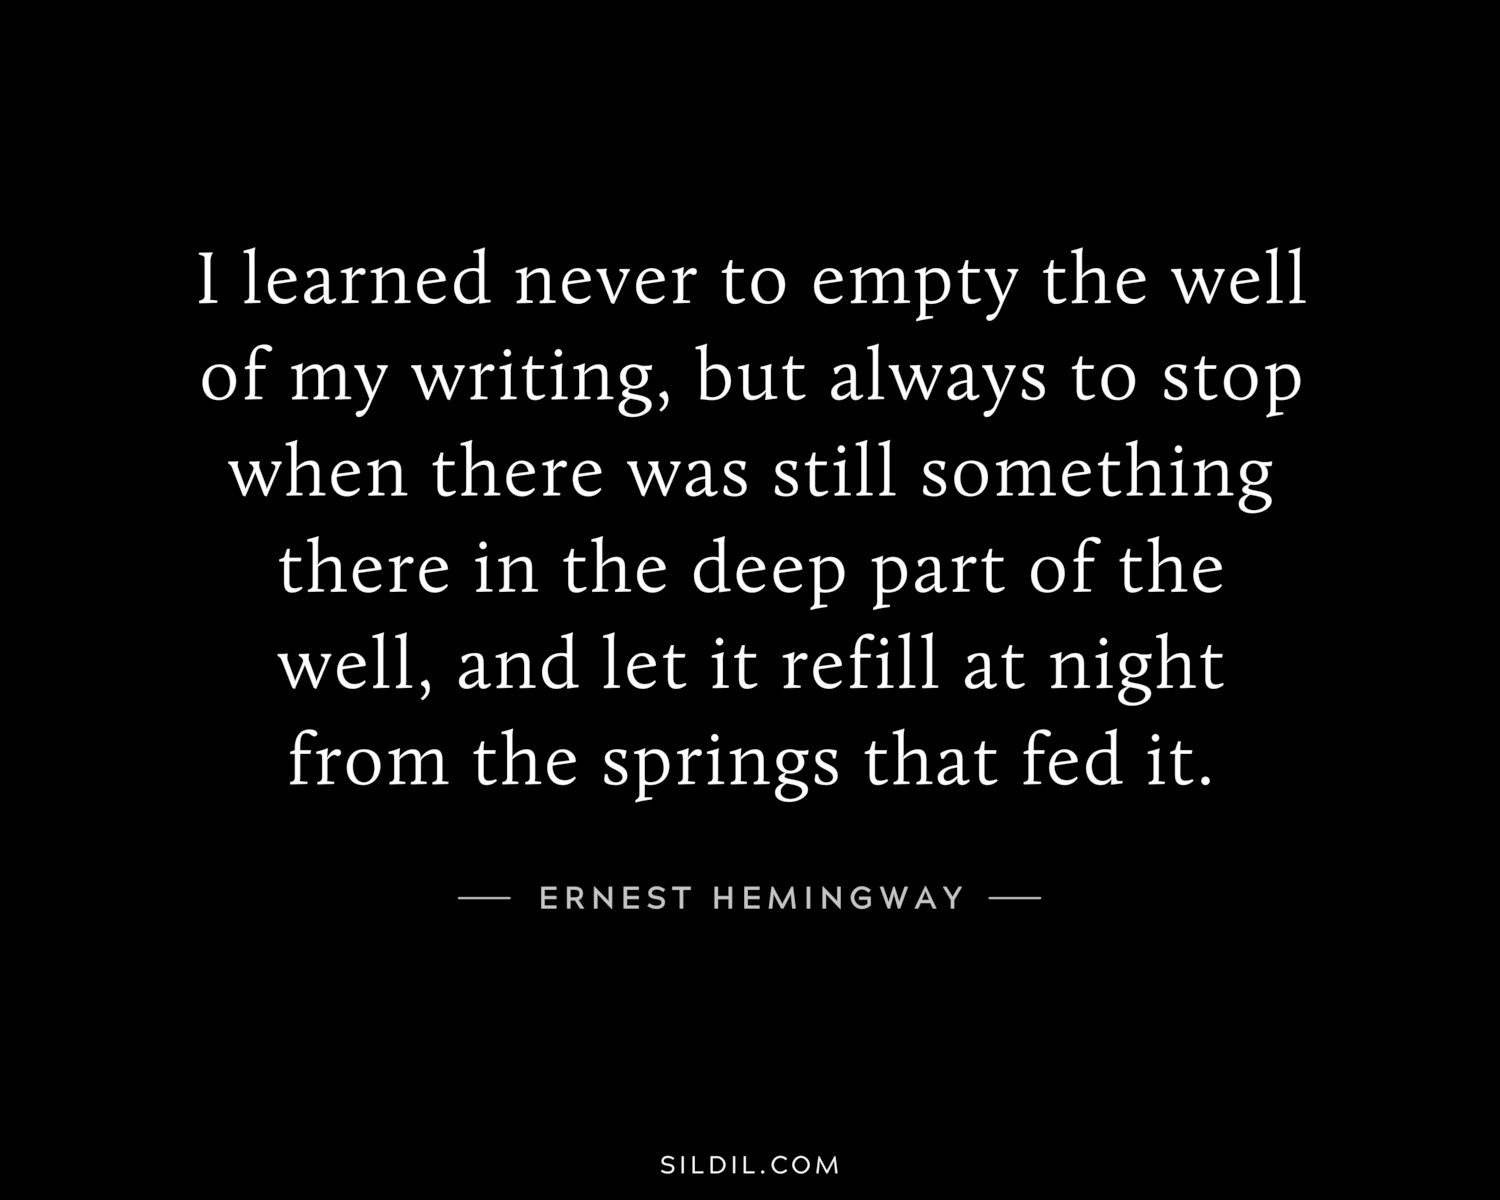 I learned never to empty the well of my writing, but always to stop when there was still something there in the deep part of the well, and let it refill at night from the springs that fed it.